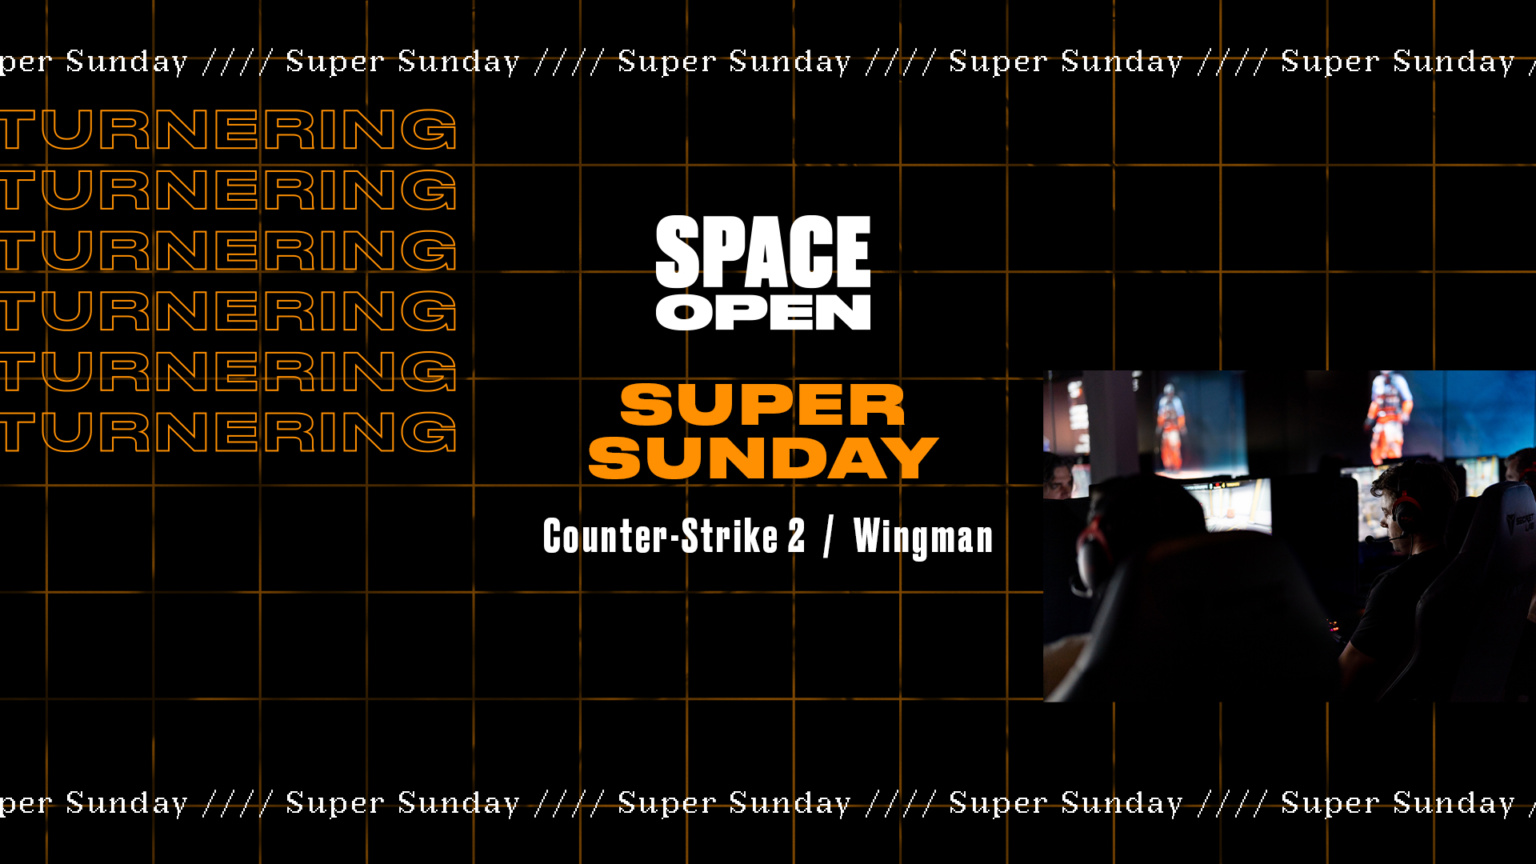 SPACE_Open-SuperSunday-1920x1080px_Website-1